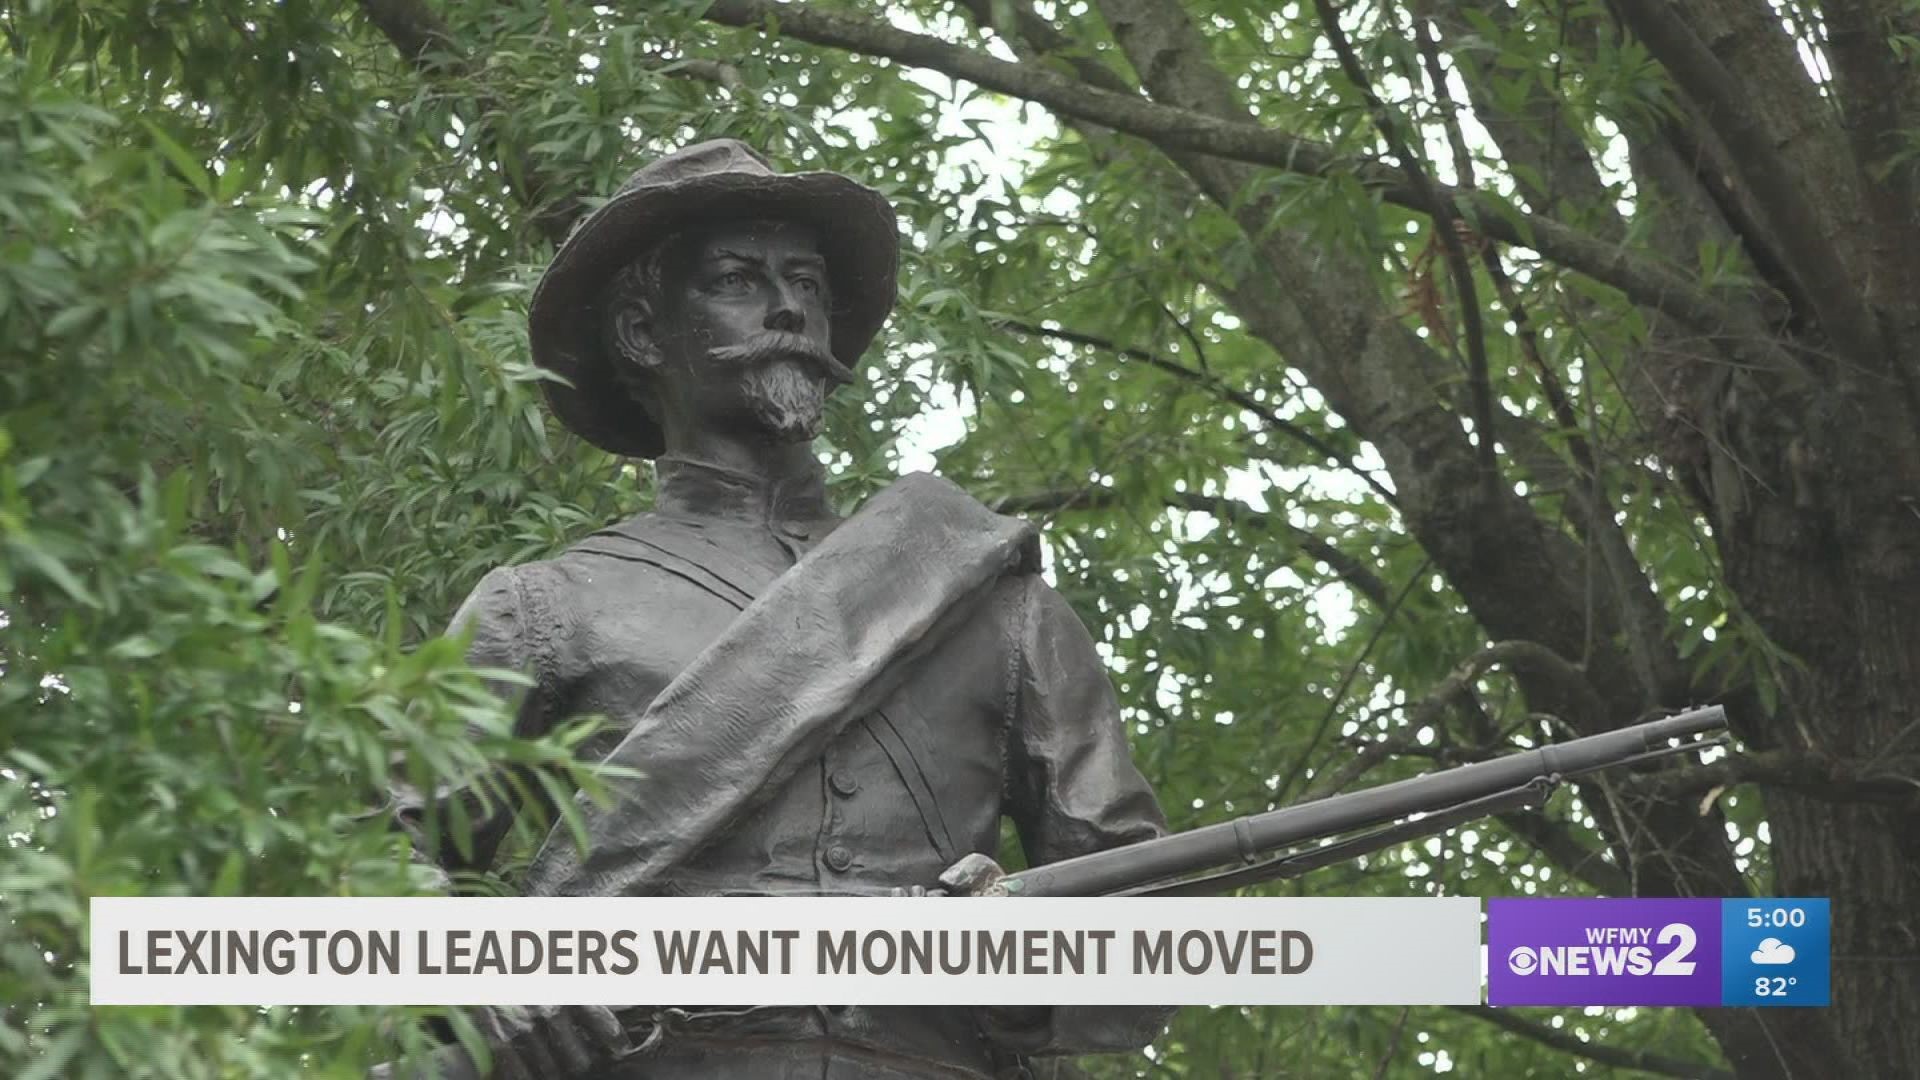 City leaders are still looking into who owns the monument and how they plan to move it.